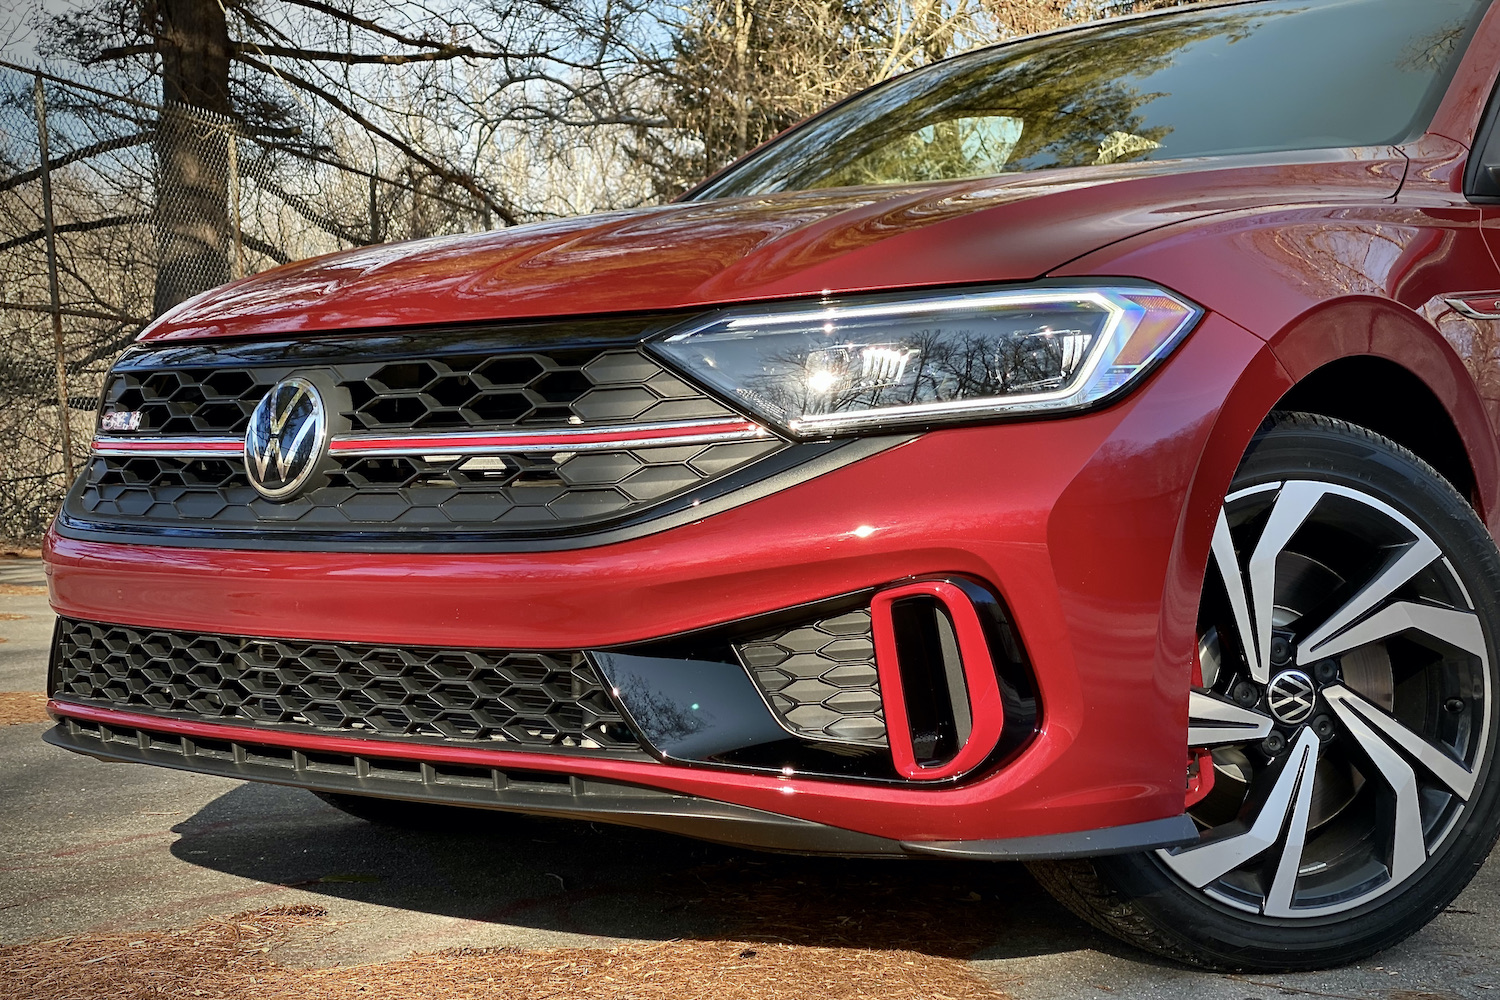 Close up of 2022 Volkswagen Jetta front end with trees in the background.